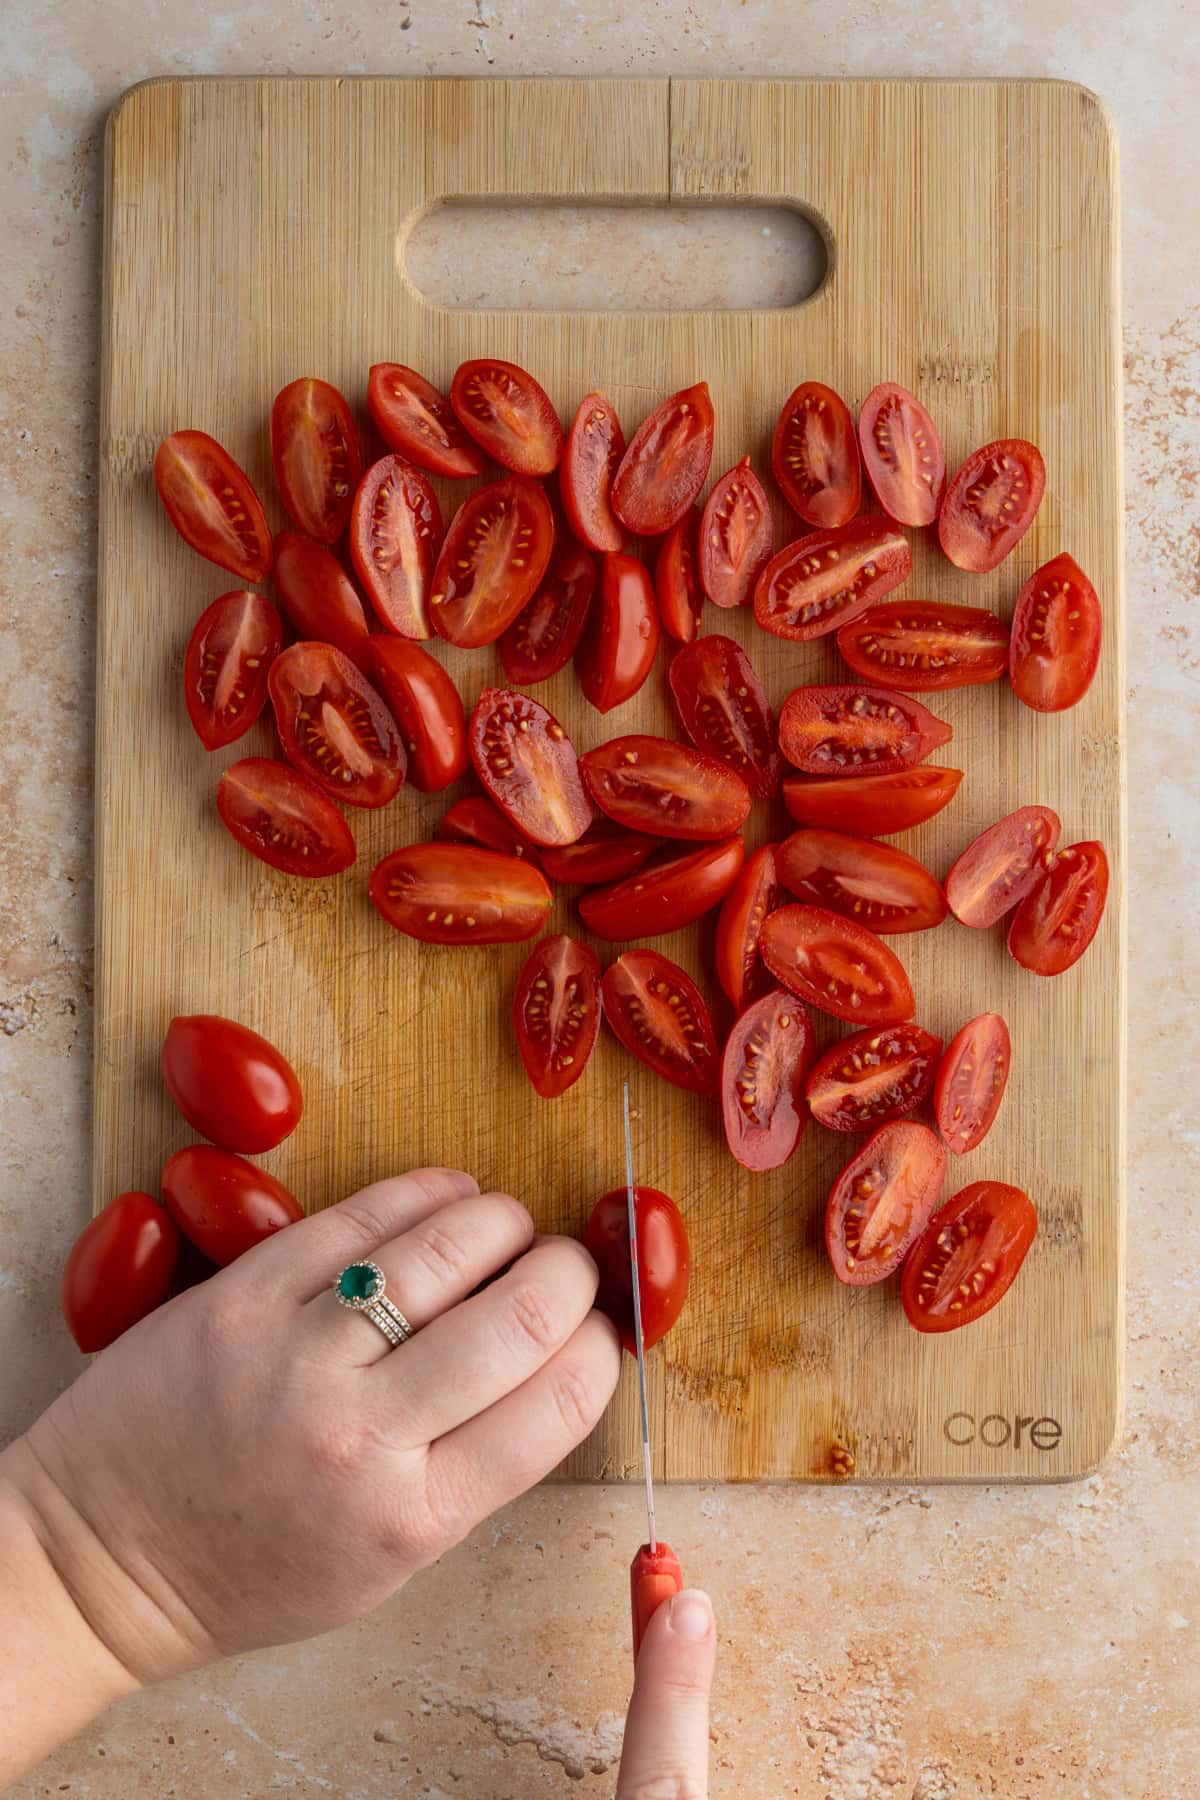 Slicing grape tomatoes in half lengthwise